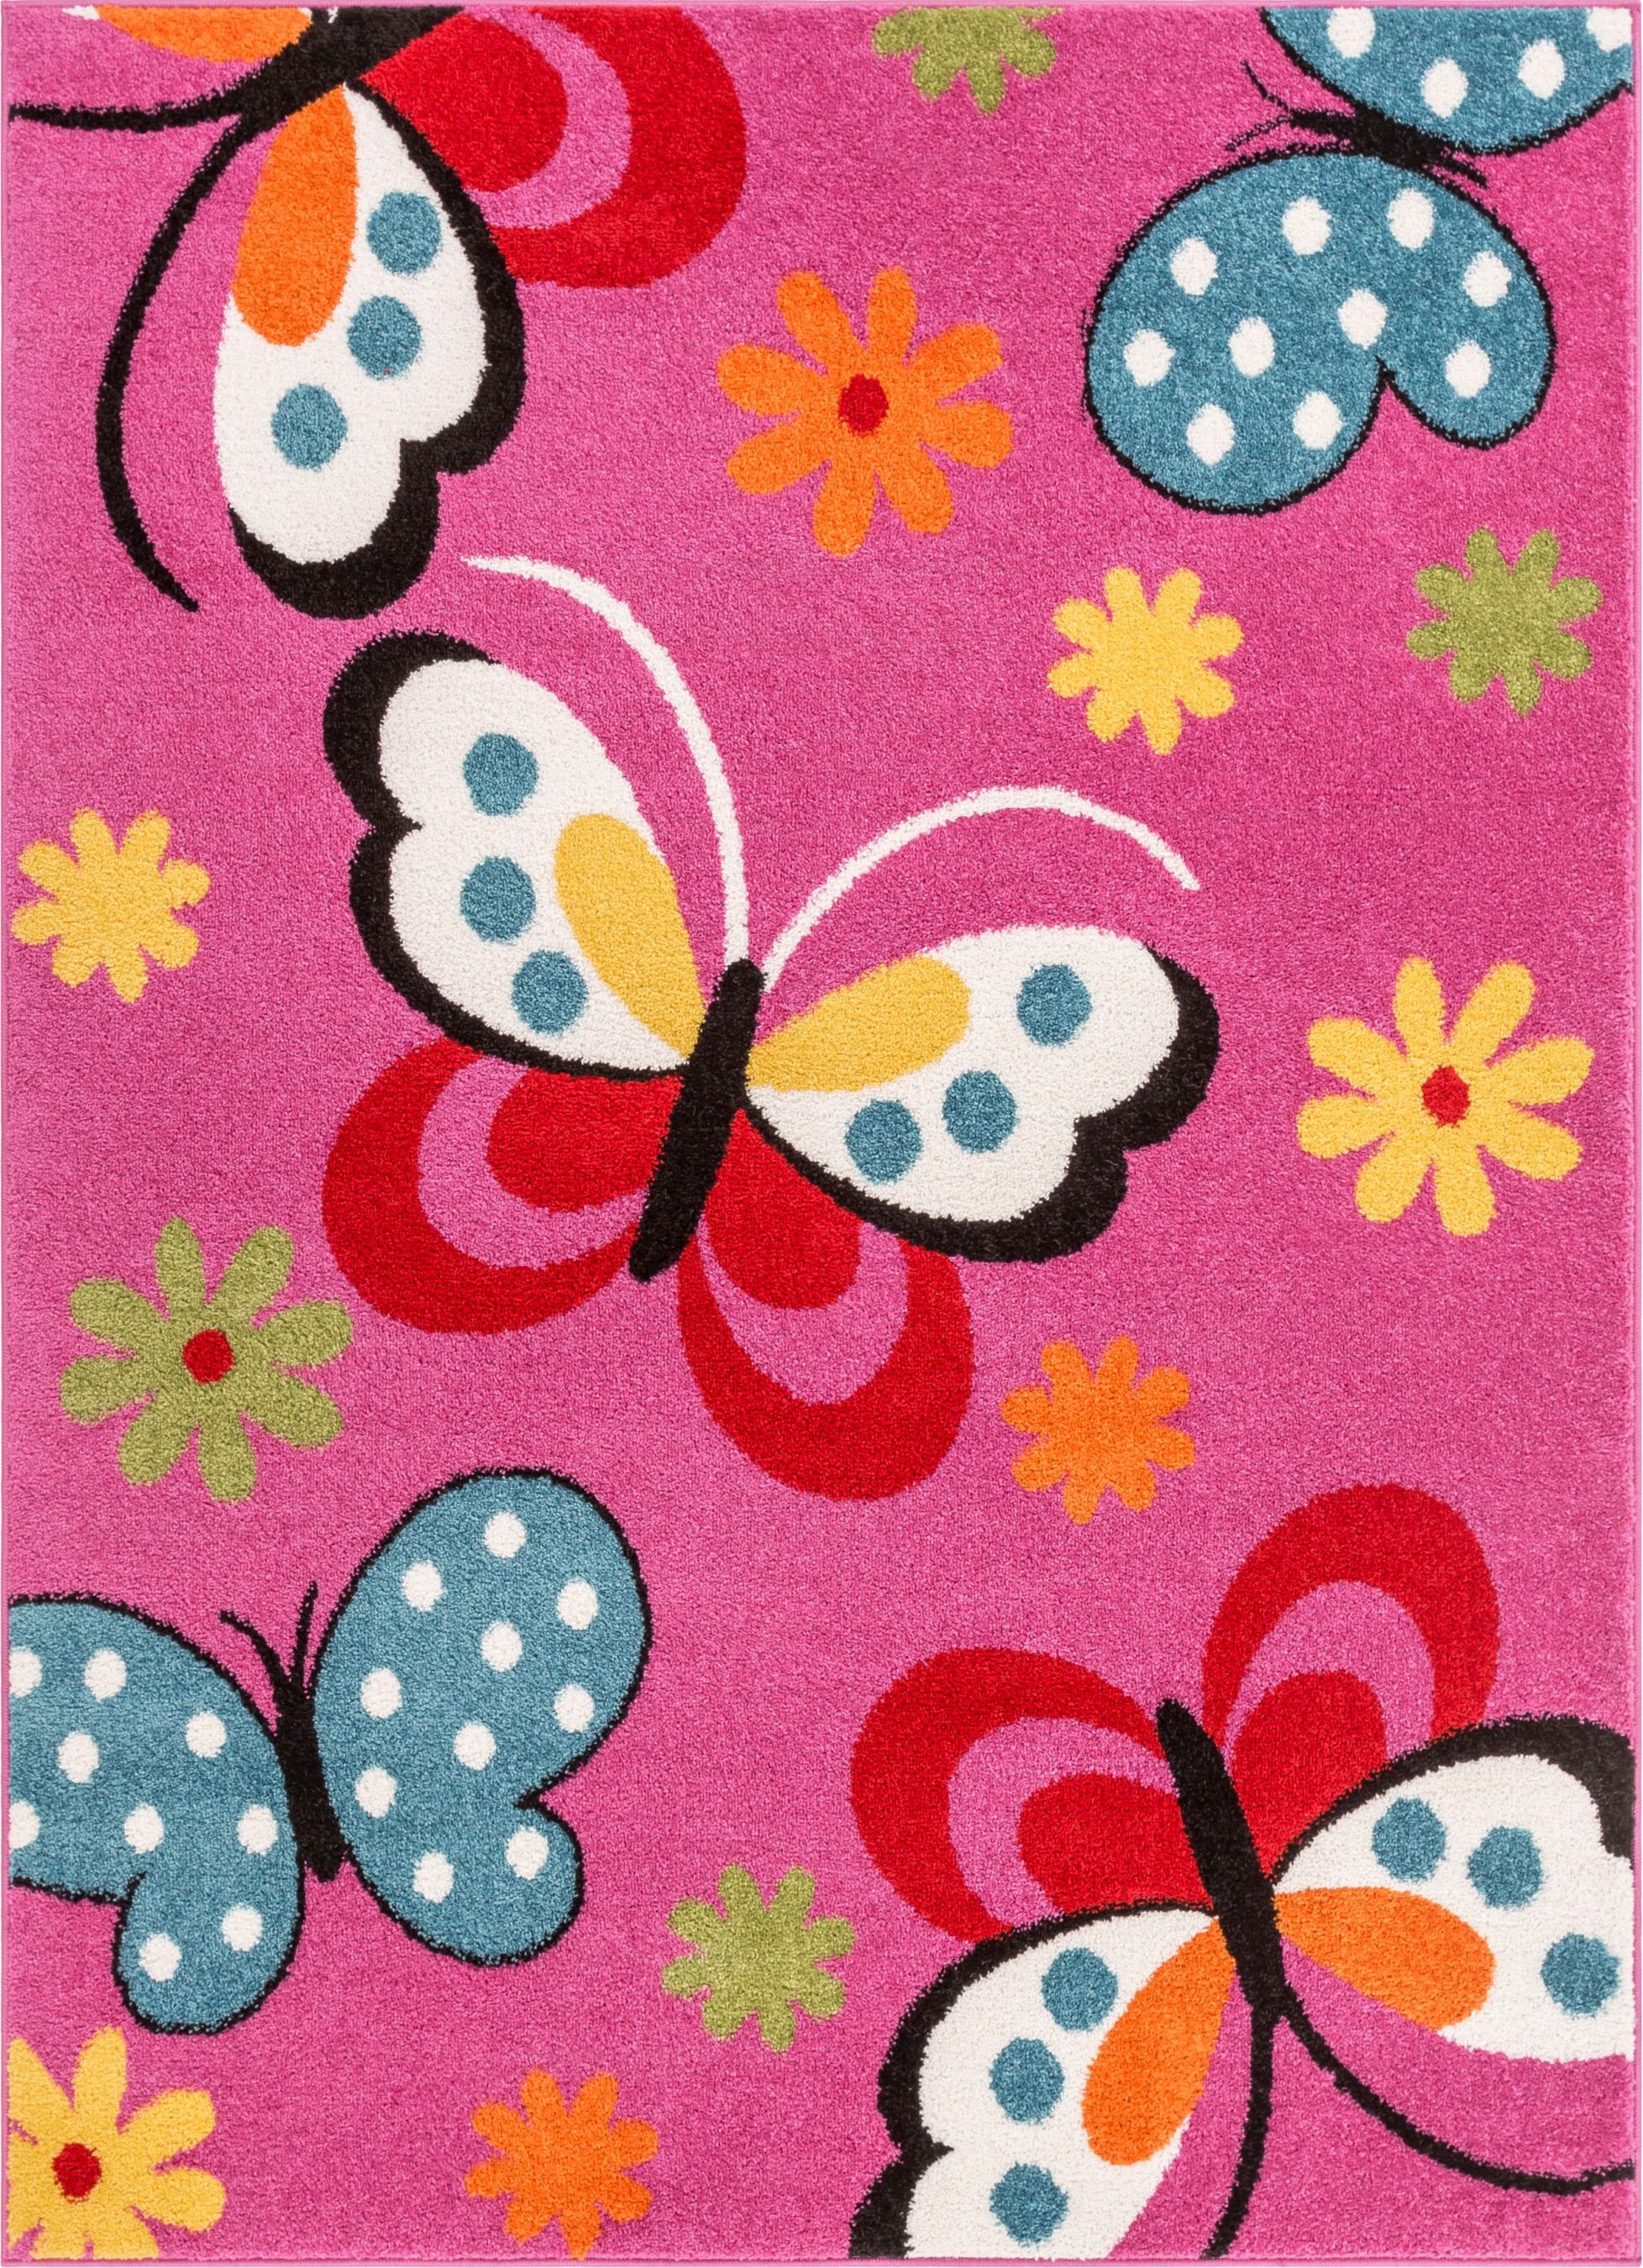 Well Woven Star Bright Daisy Butterflies Kids Area Rug - image 2 of 8